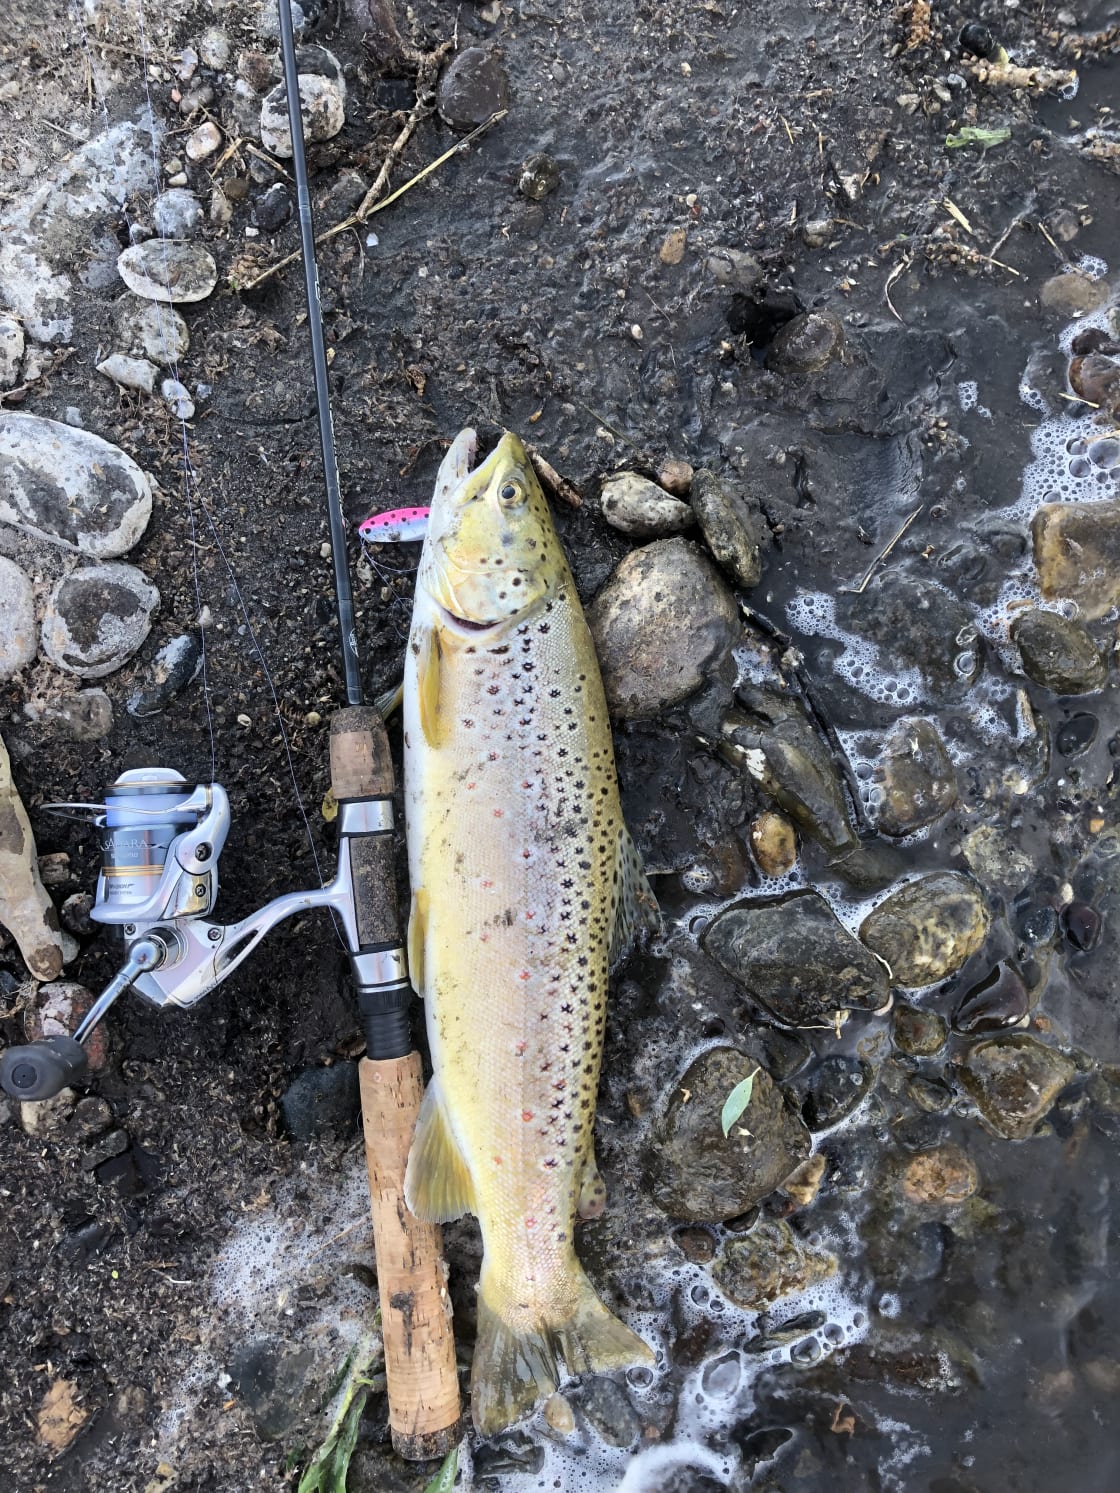 Caught a nice brown trout 